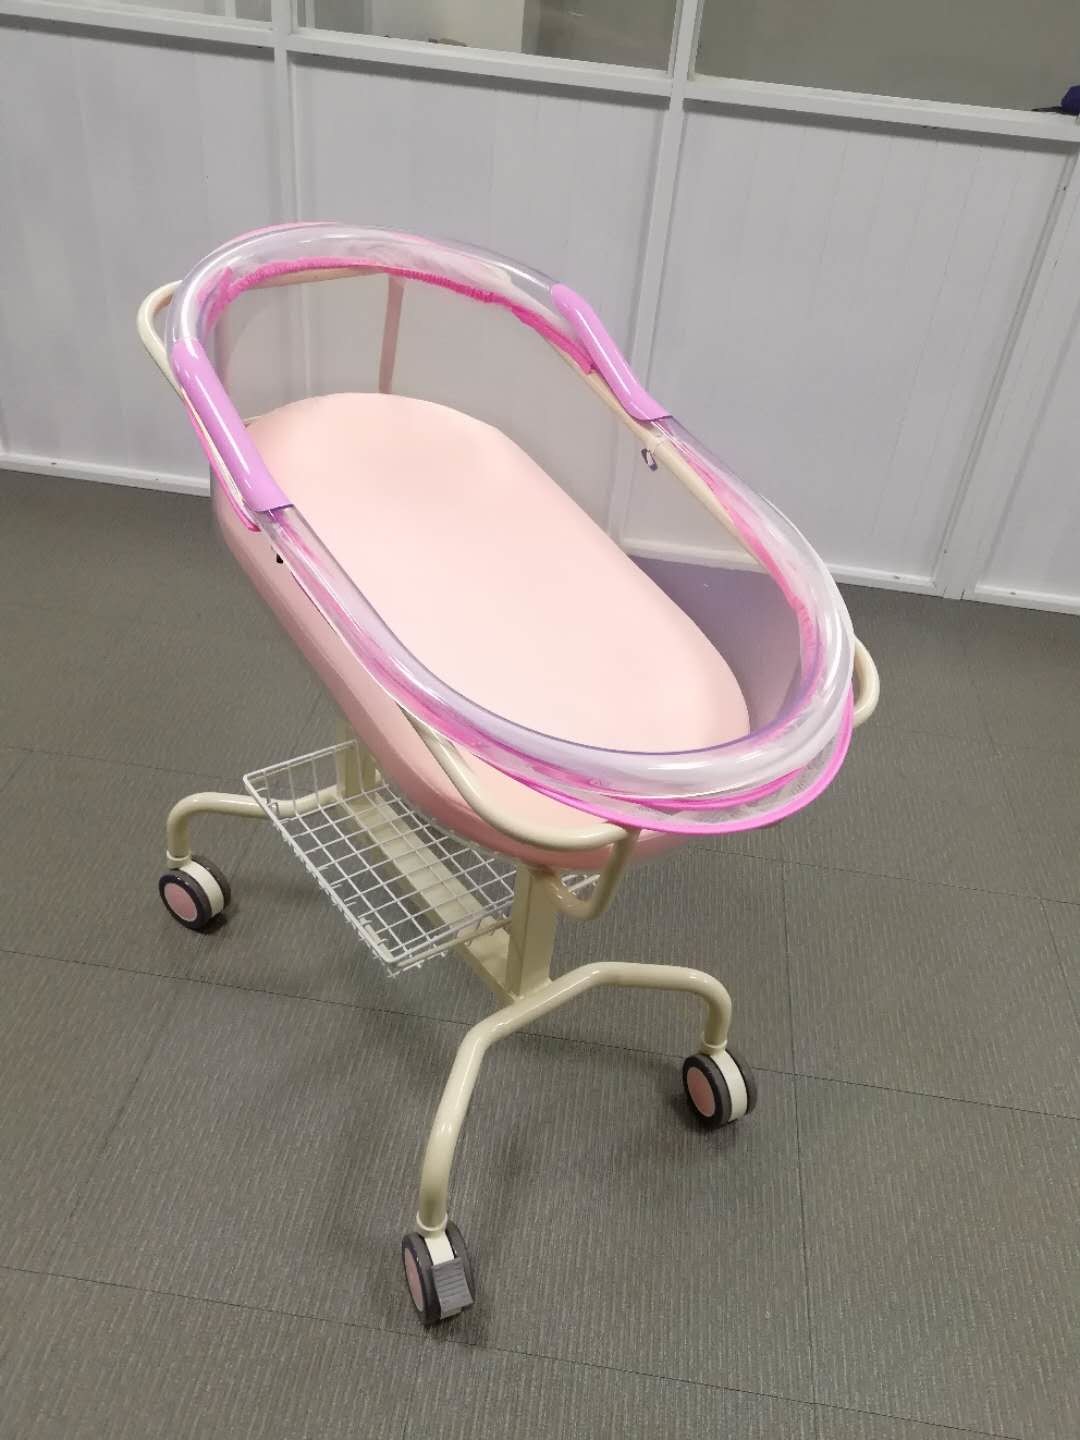  Approved Pediatric Hospital Baby Crib With Basket , Mattress ＆ Sleeping Basin Manufactures